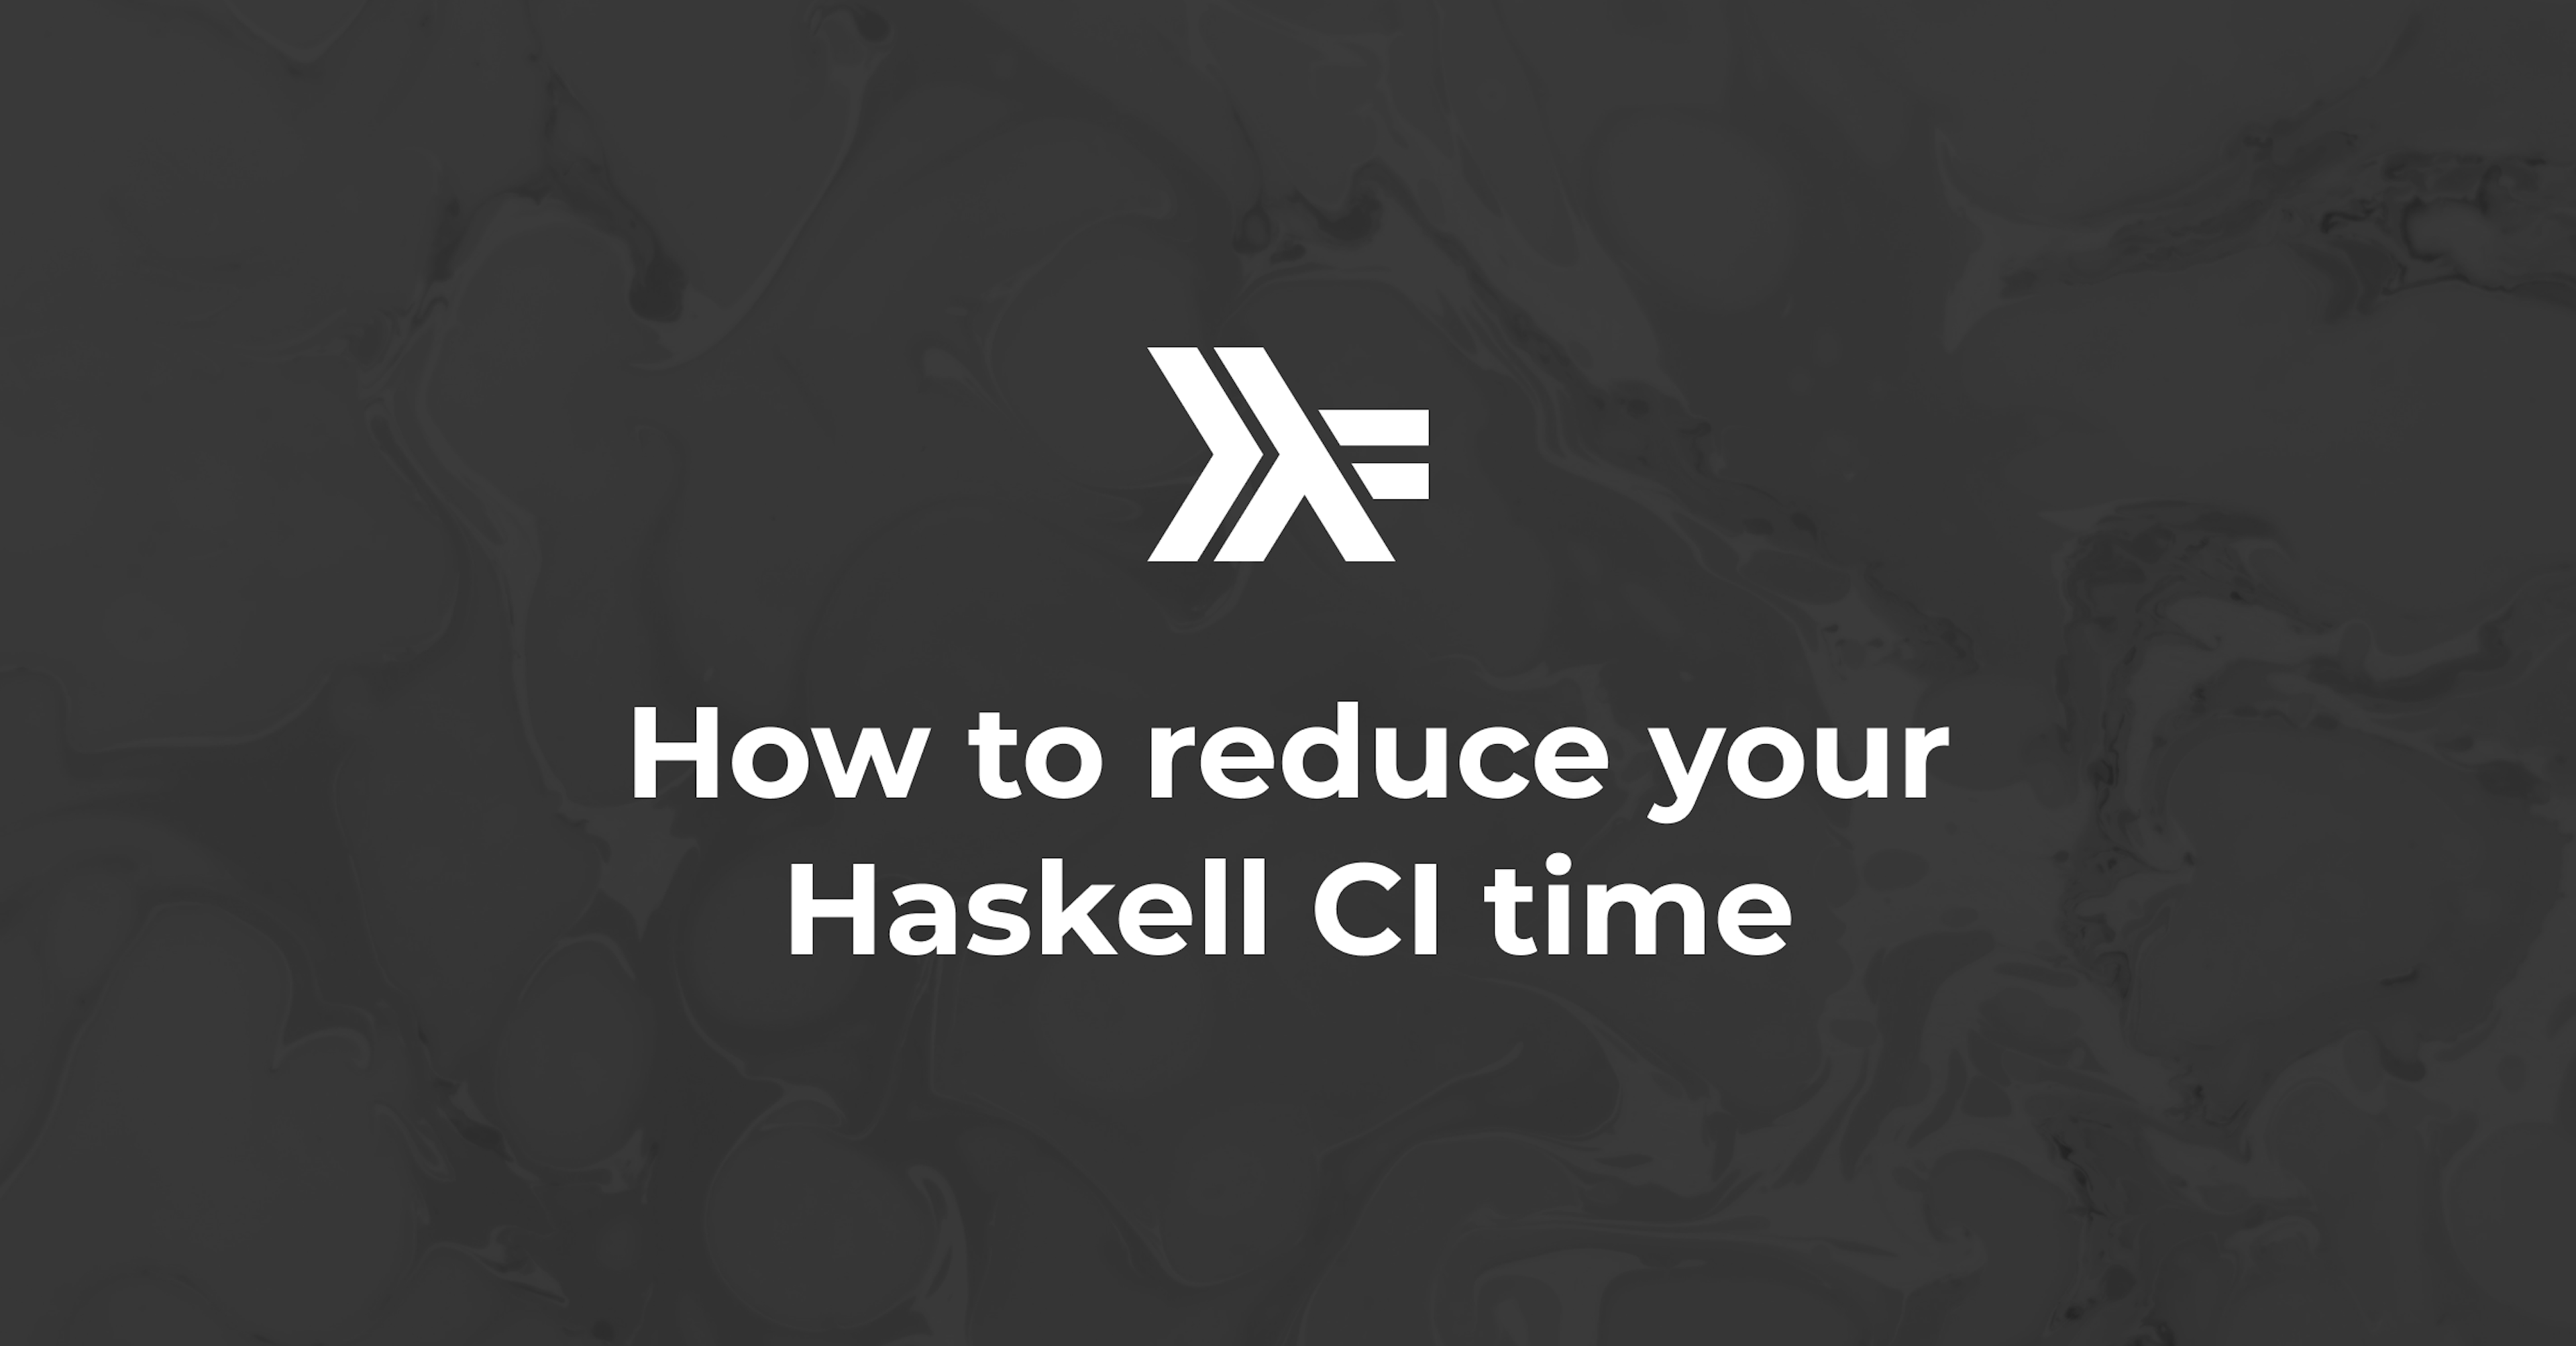 How I reduced my Haskell CI time by 84%